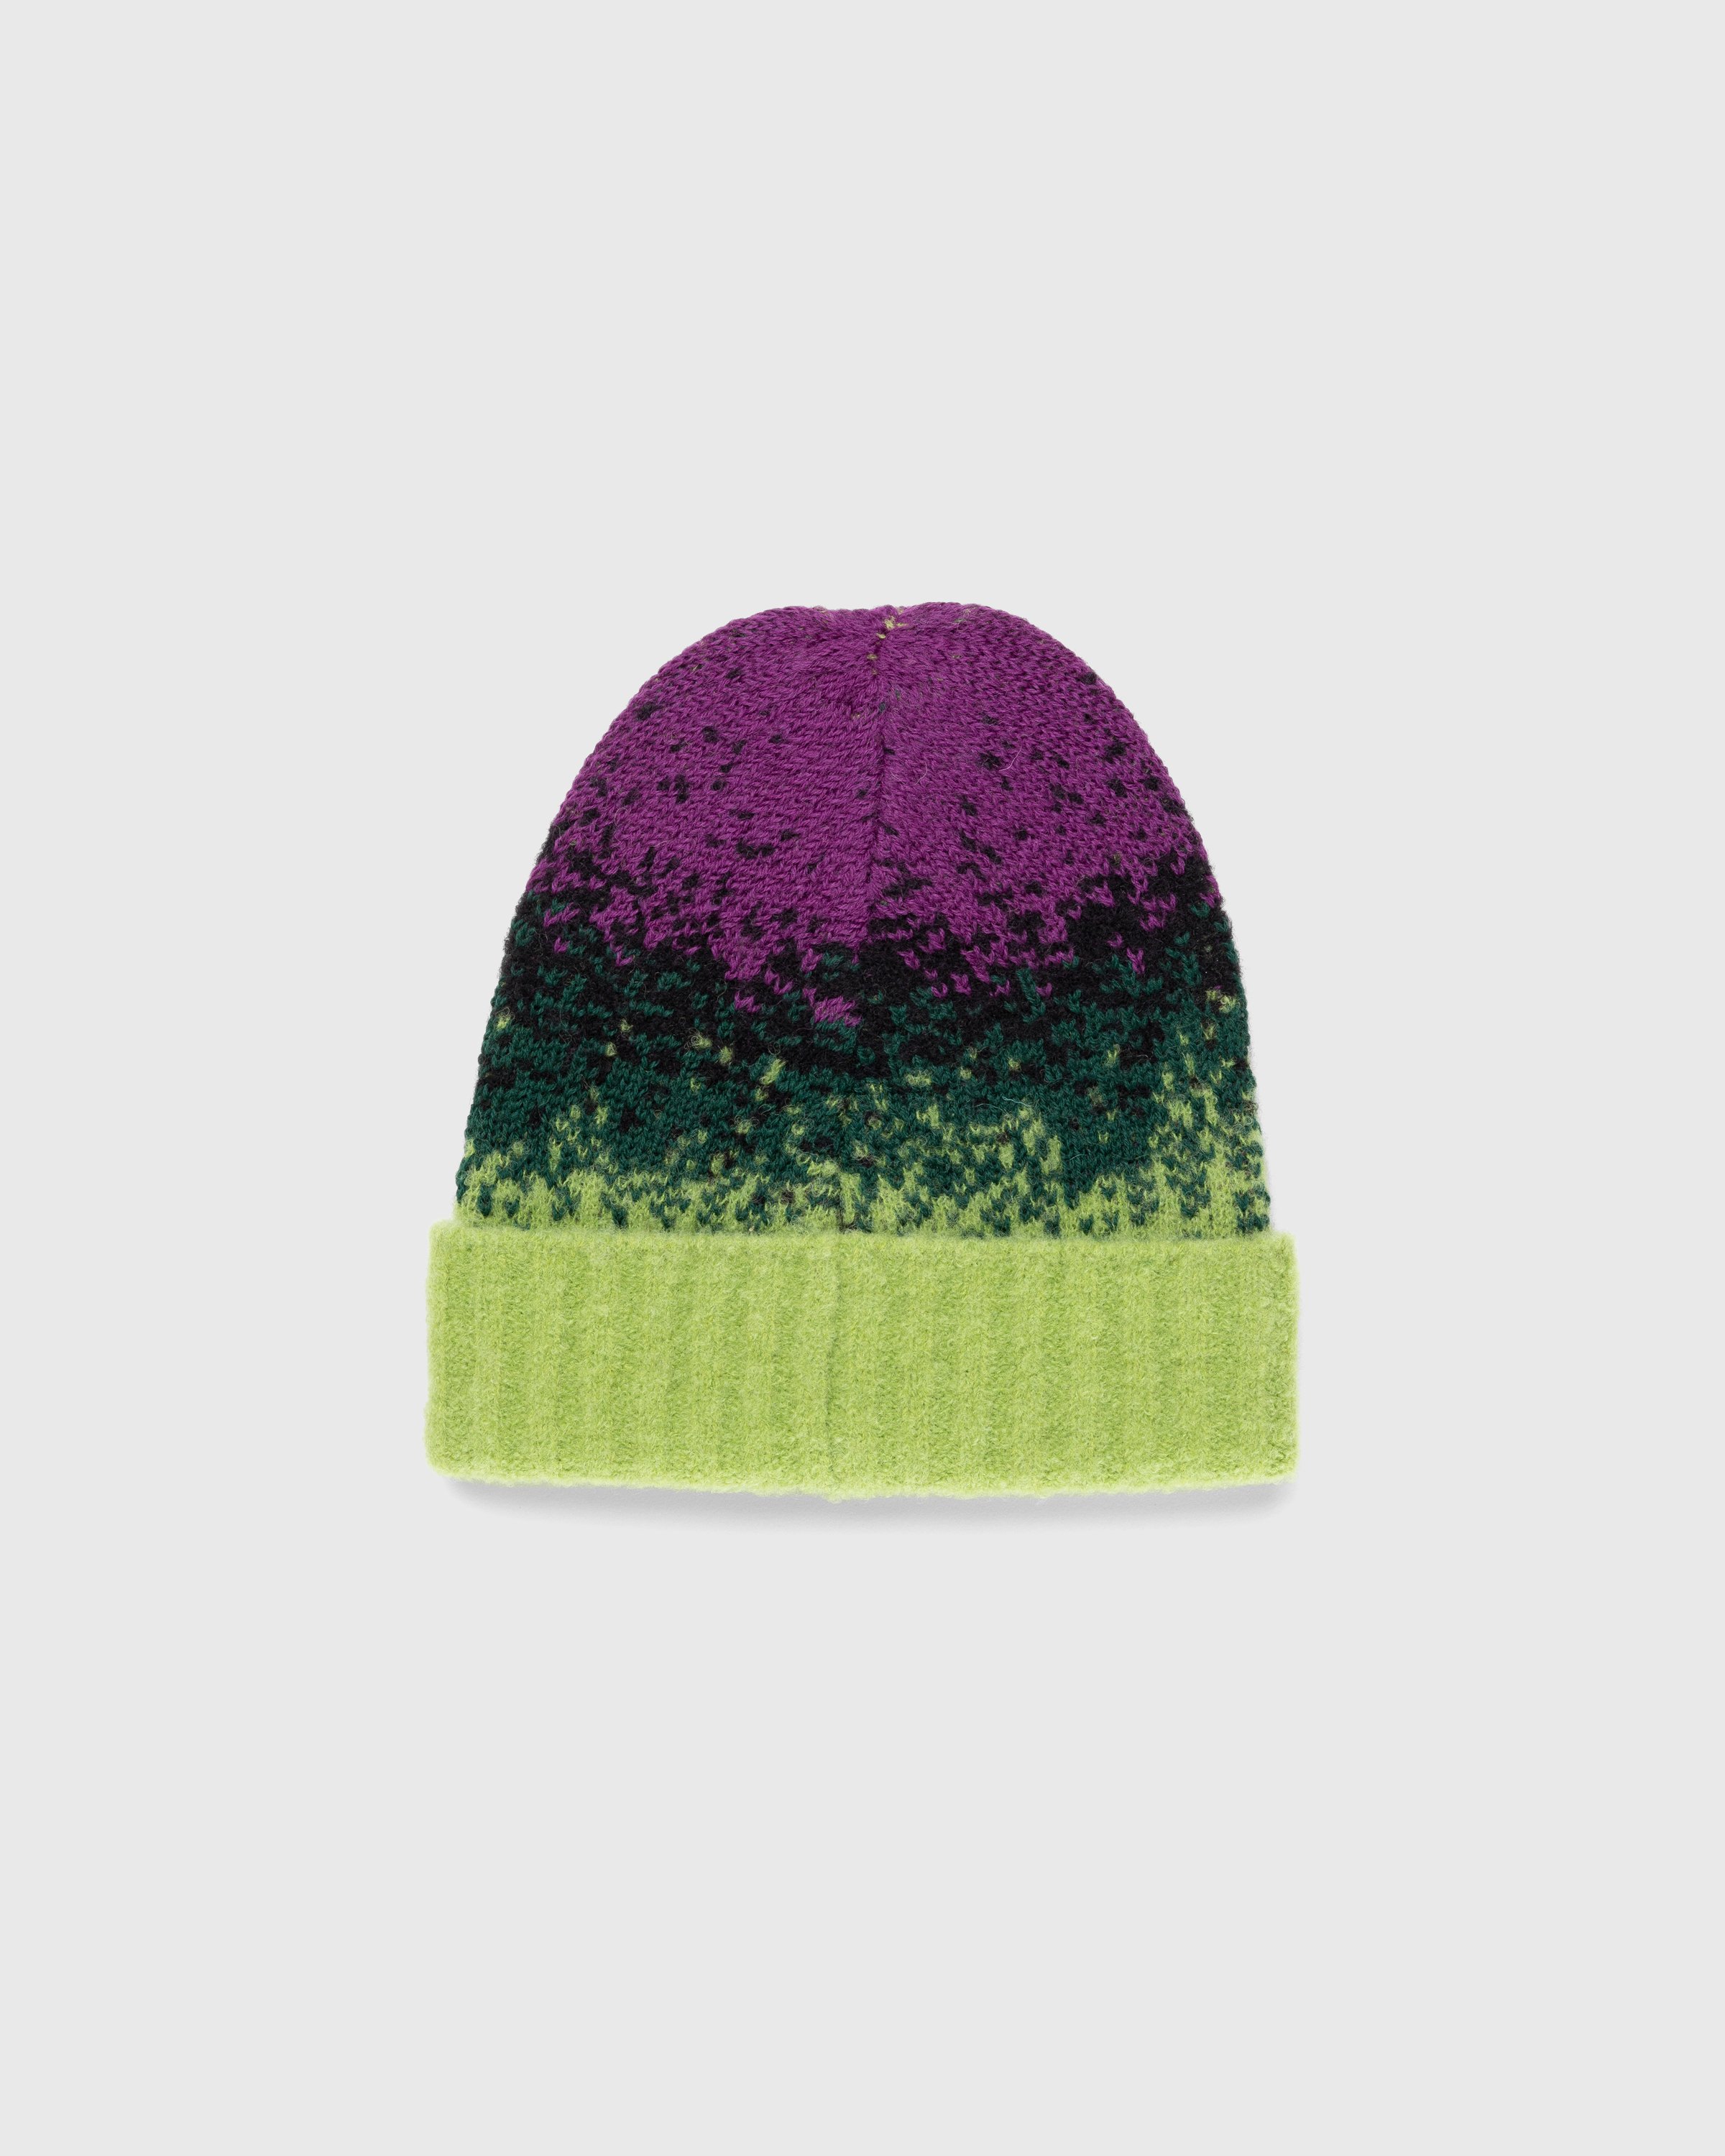 Y/Project - Gradient Knit Beanie Multi - Accessories - Multi - Image 2